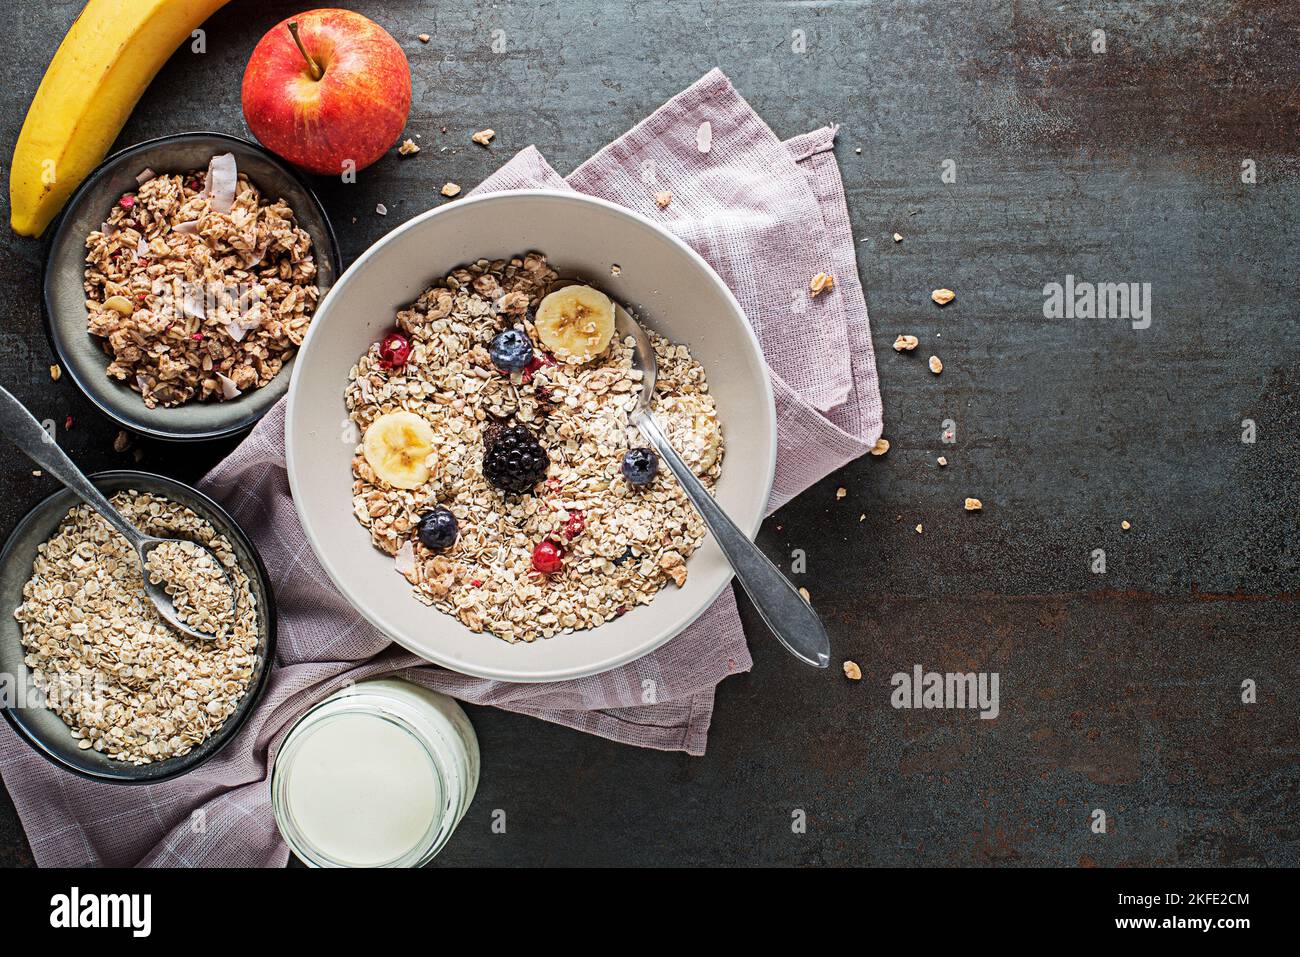 A bowl of dry granola and muesli served with fresh fruit. Oatmeal plate. Healthy food, diet. Top view. Stock Photo